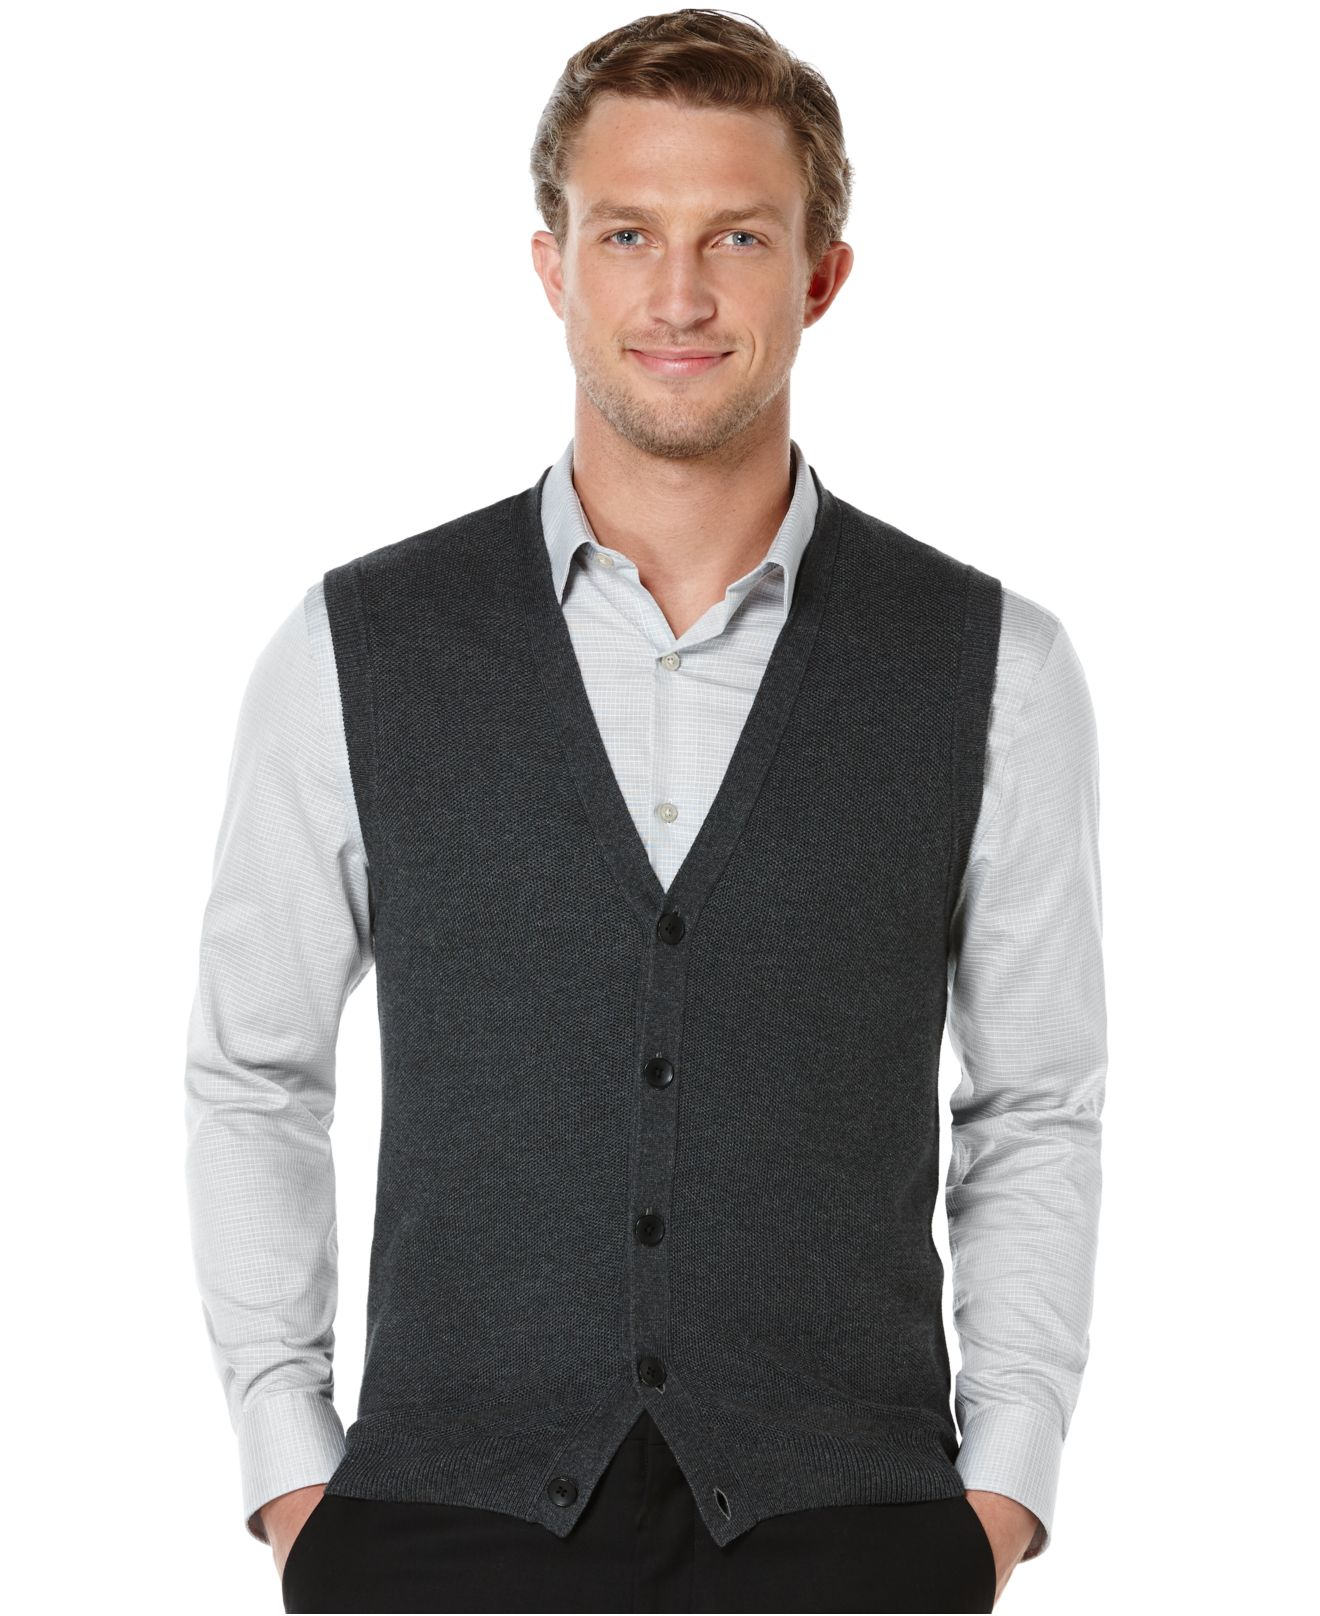 Perry Ellis Solid Textured Sweater Vest in Gray for Men - Lyst